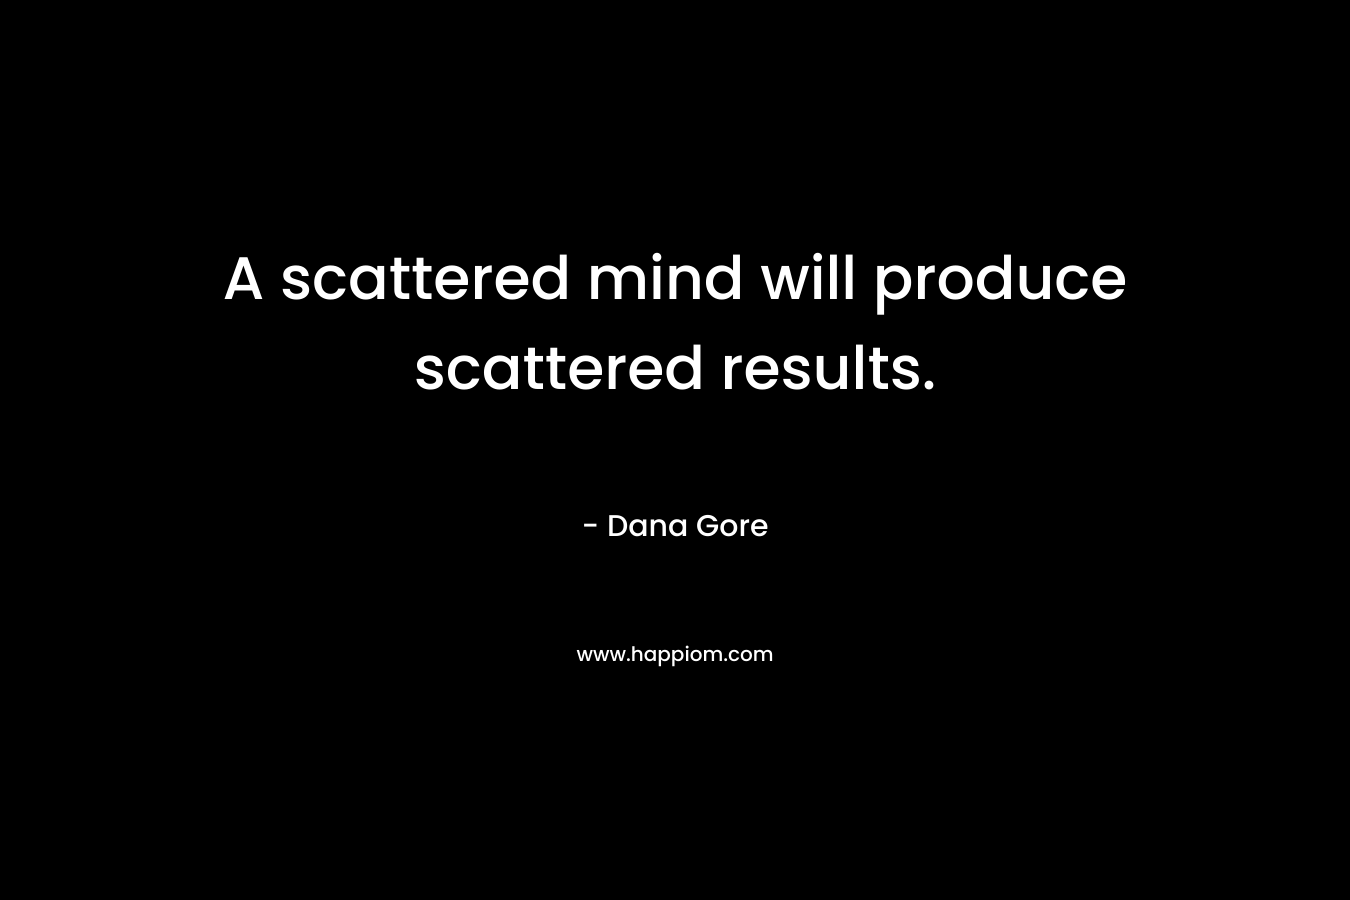 A scattered mind will produce scattered results.